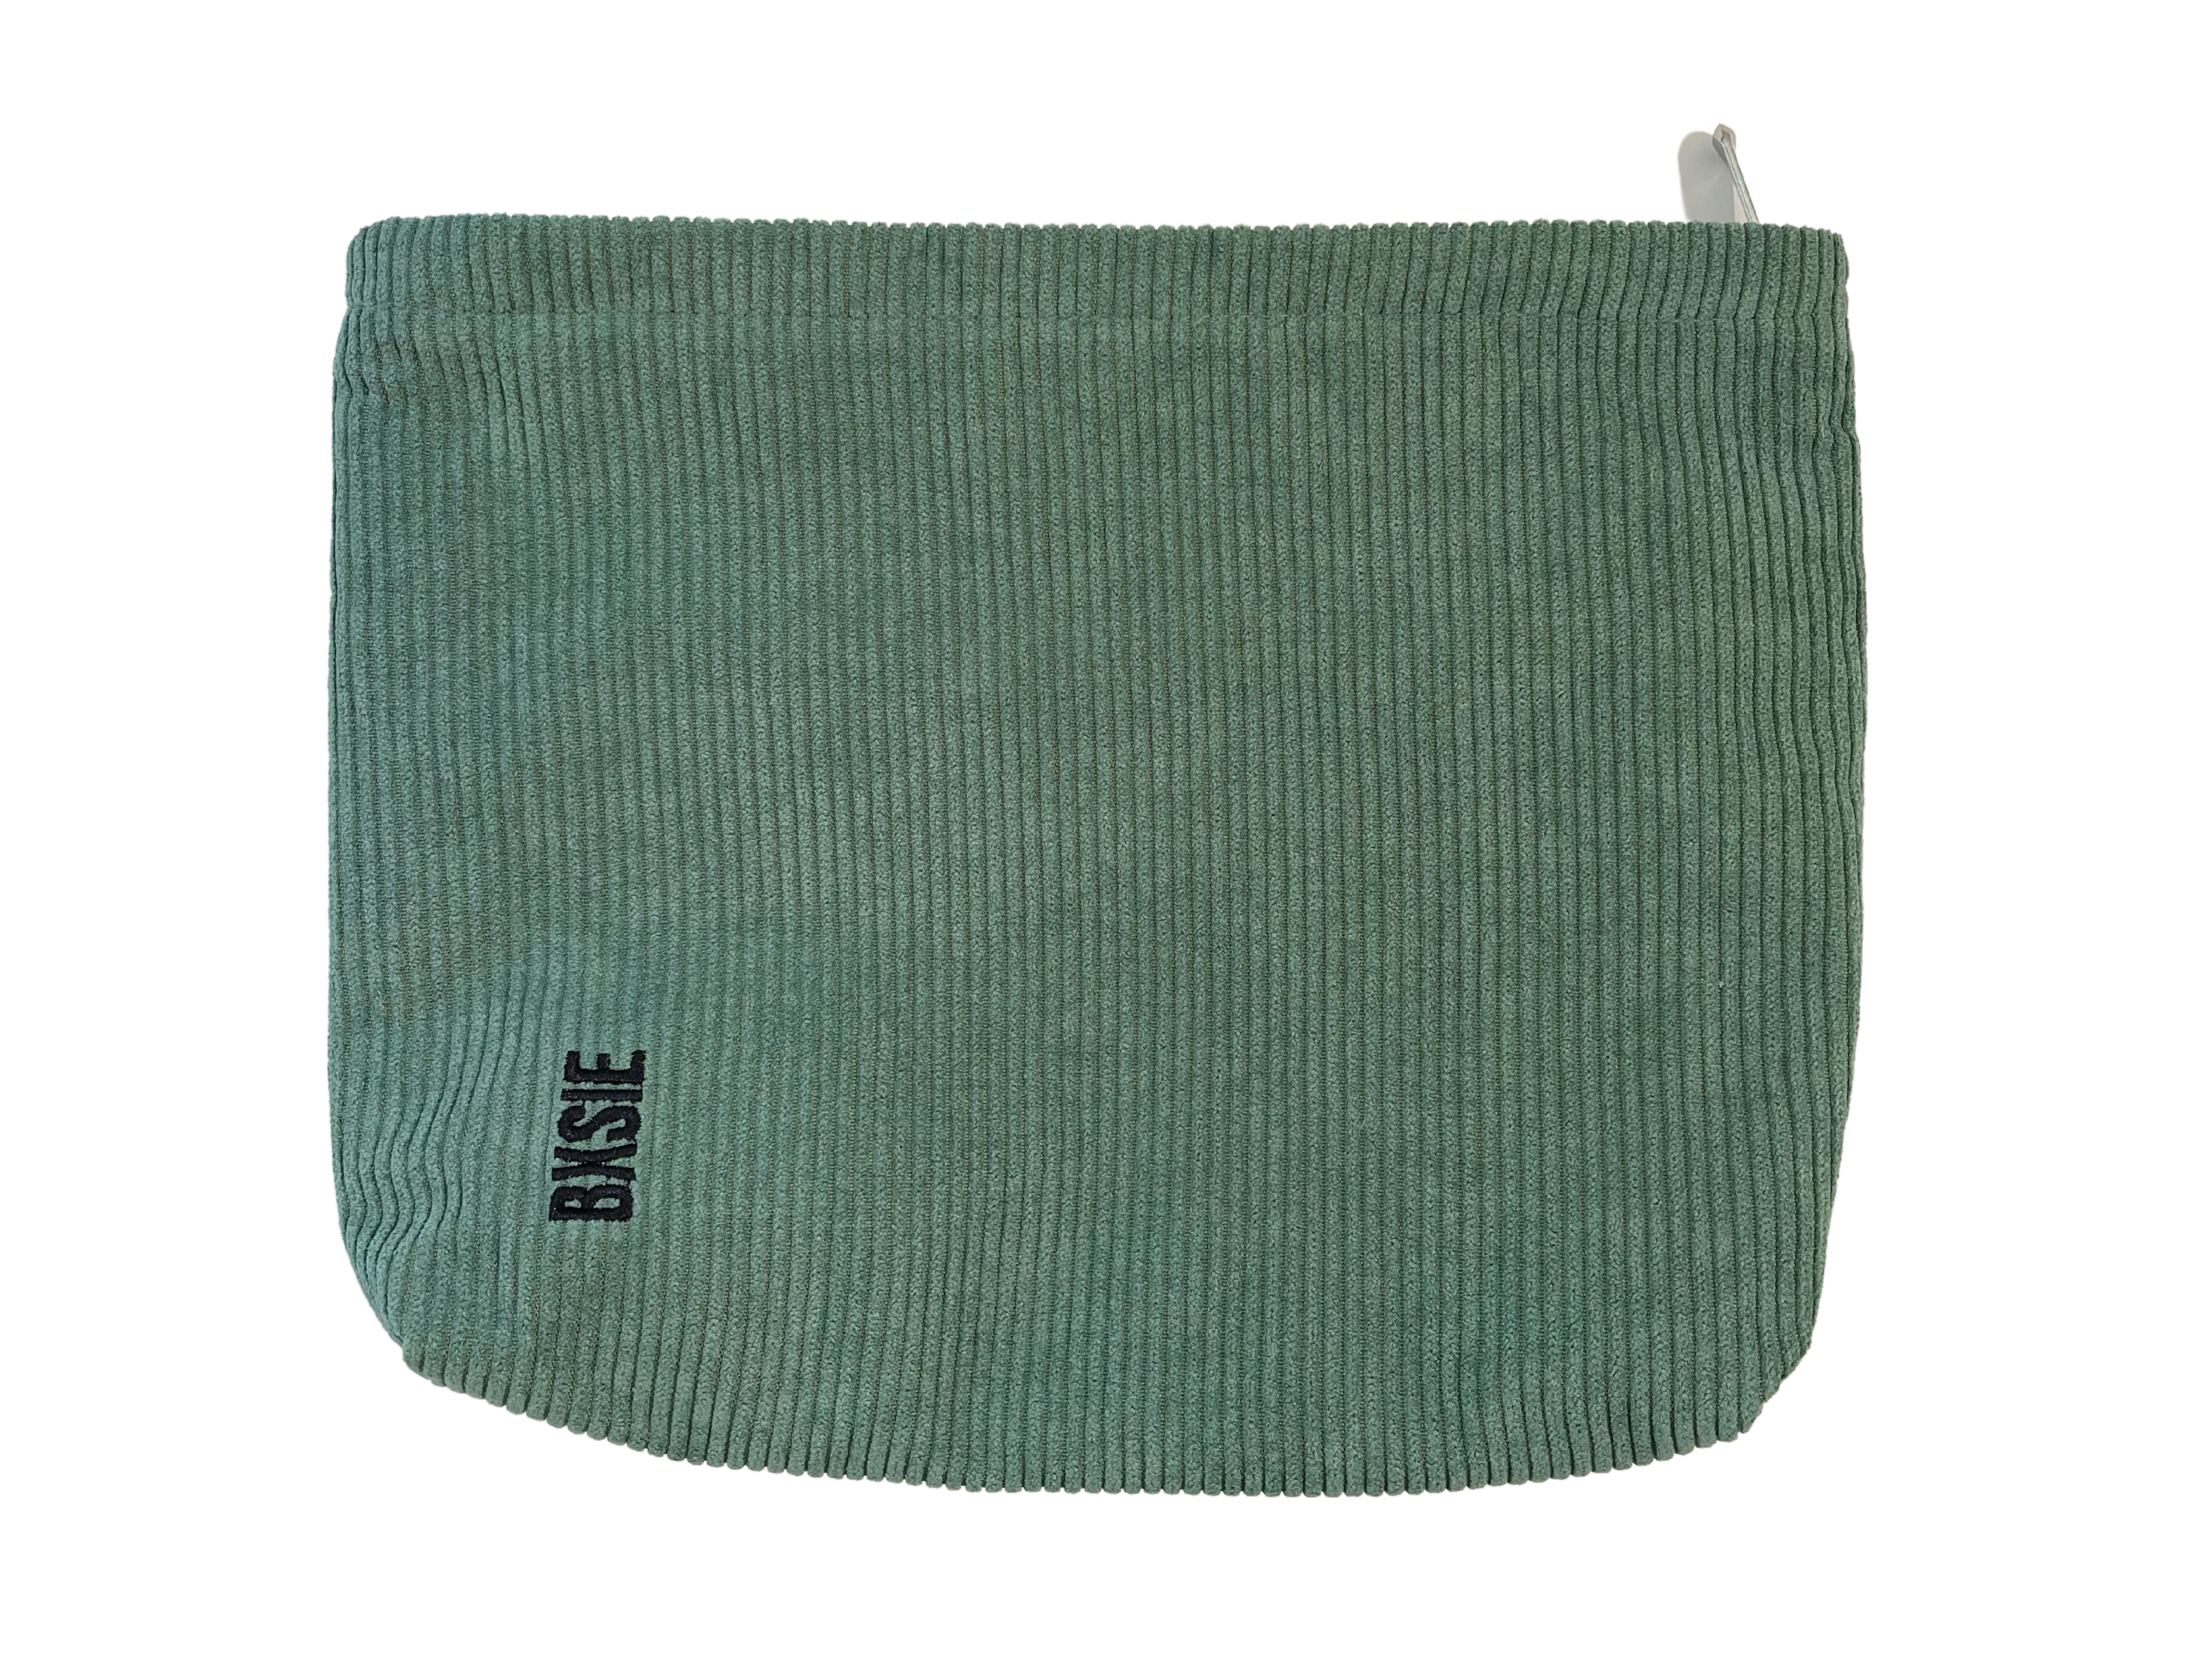 book sleeve, book pouch, front view, green color, bxsie